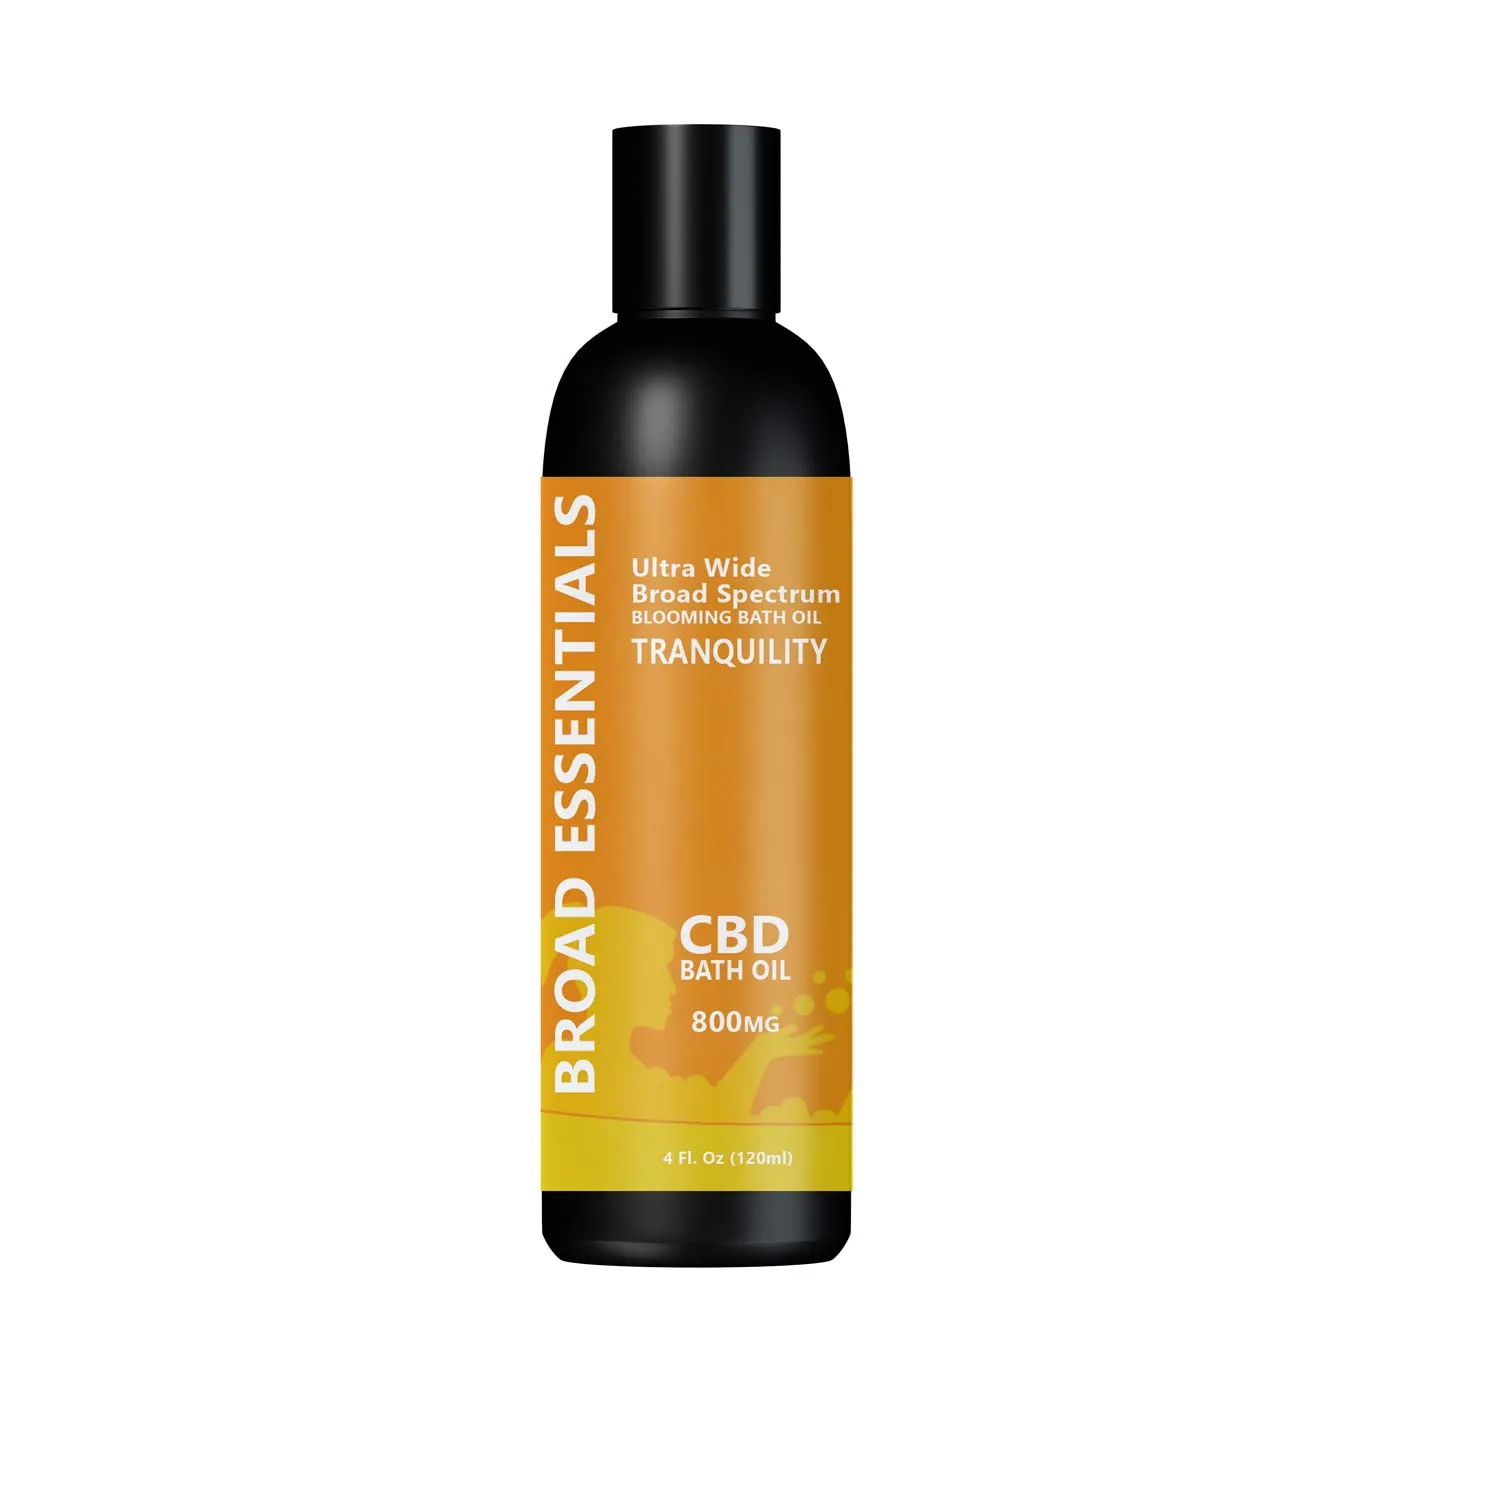 Tranquility CBD Bath Oil with 800mg Broad Spectrum CBD by Broad Essentials | Tranquility Blooming CBD Infused Bath Oil